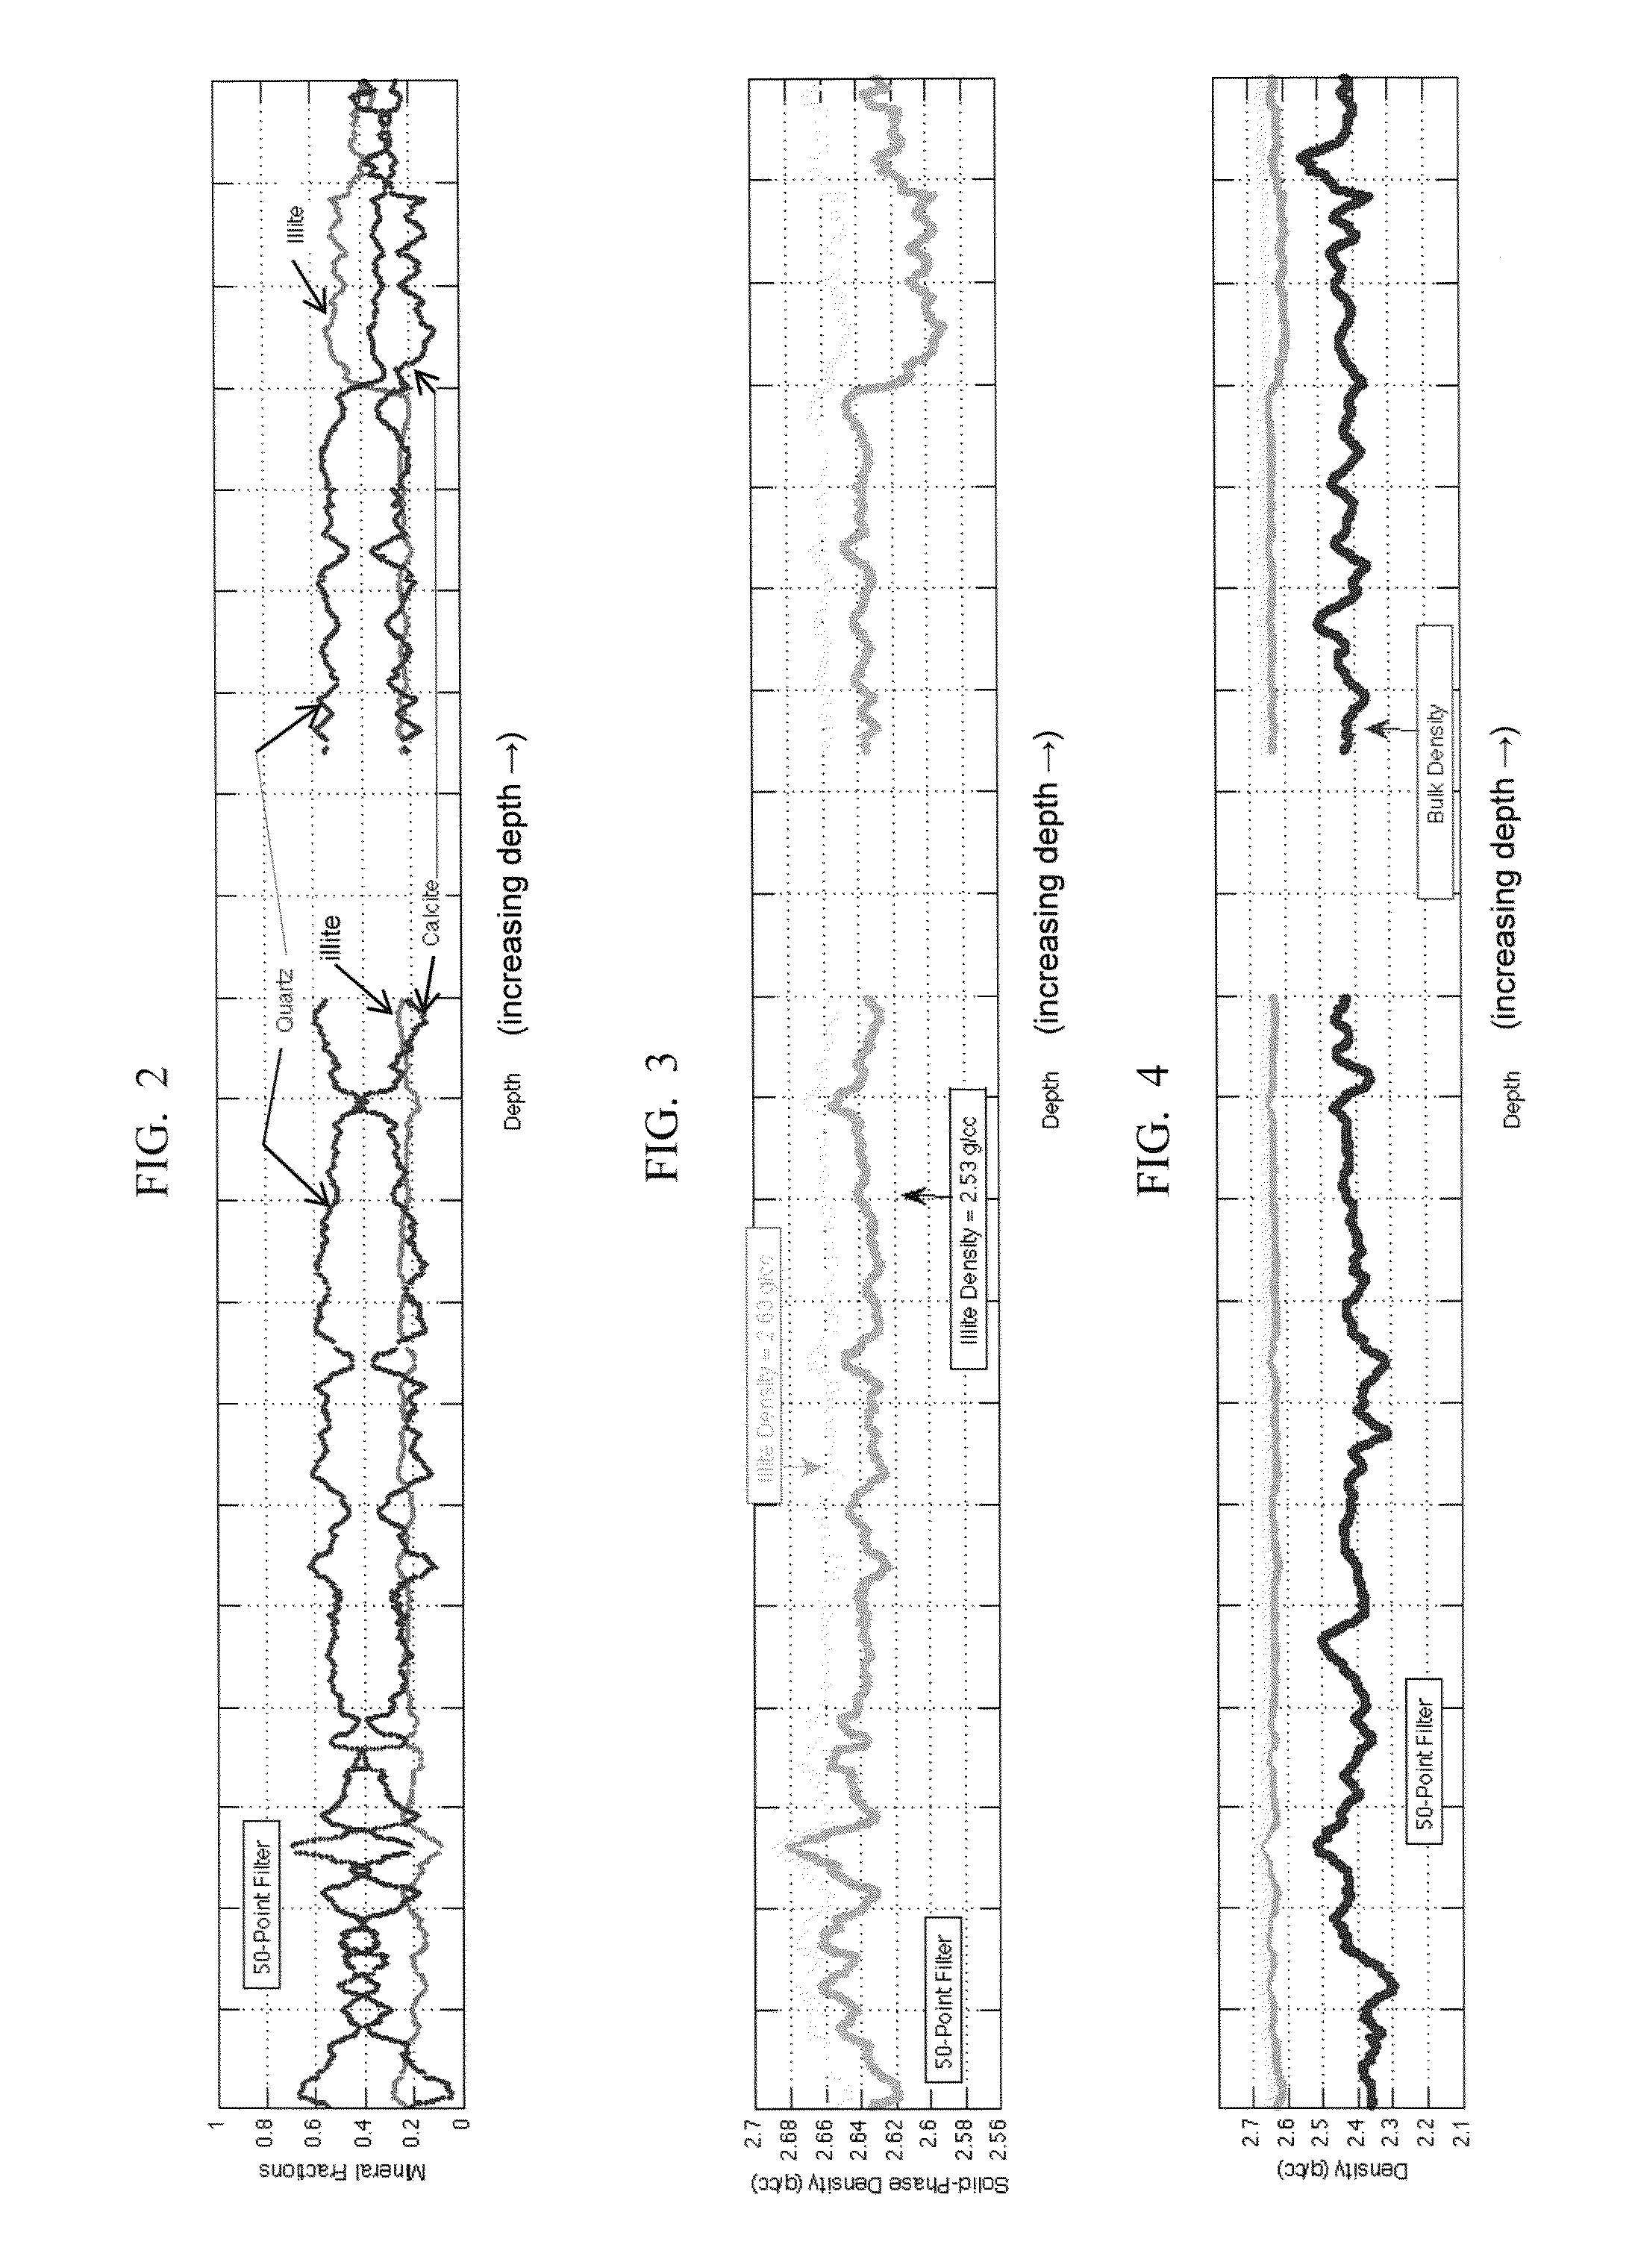 Method Of Determining Reservoir Properties And Quality With Multiple Energy X-Ray Imaging